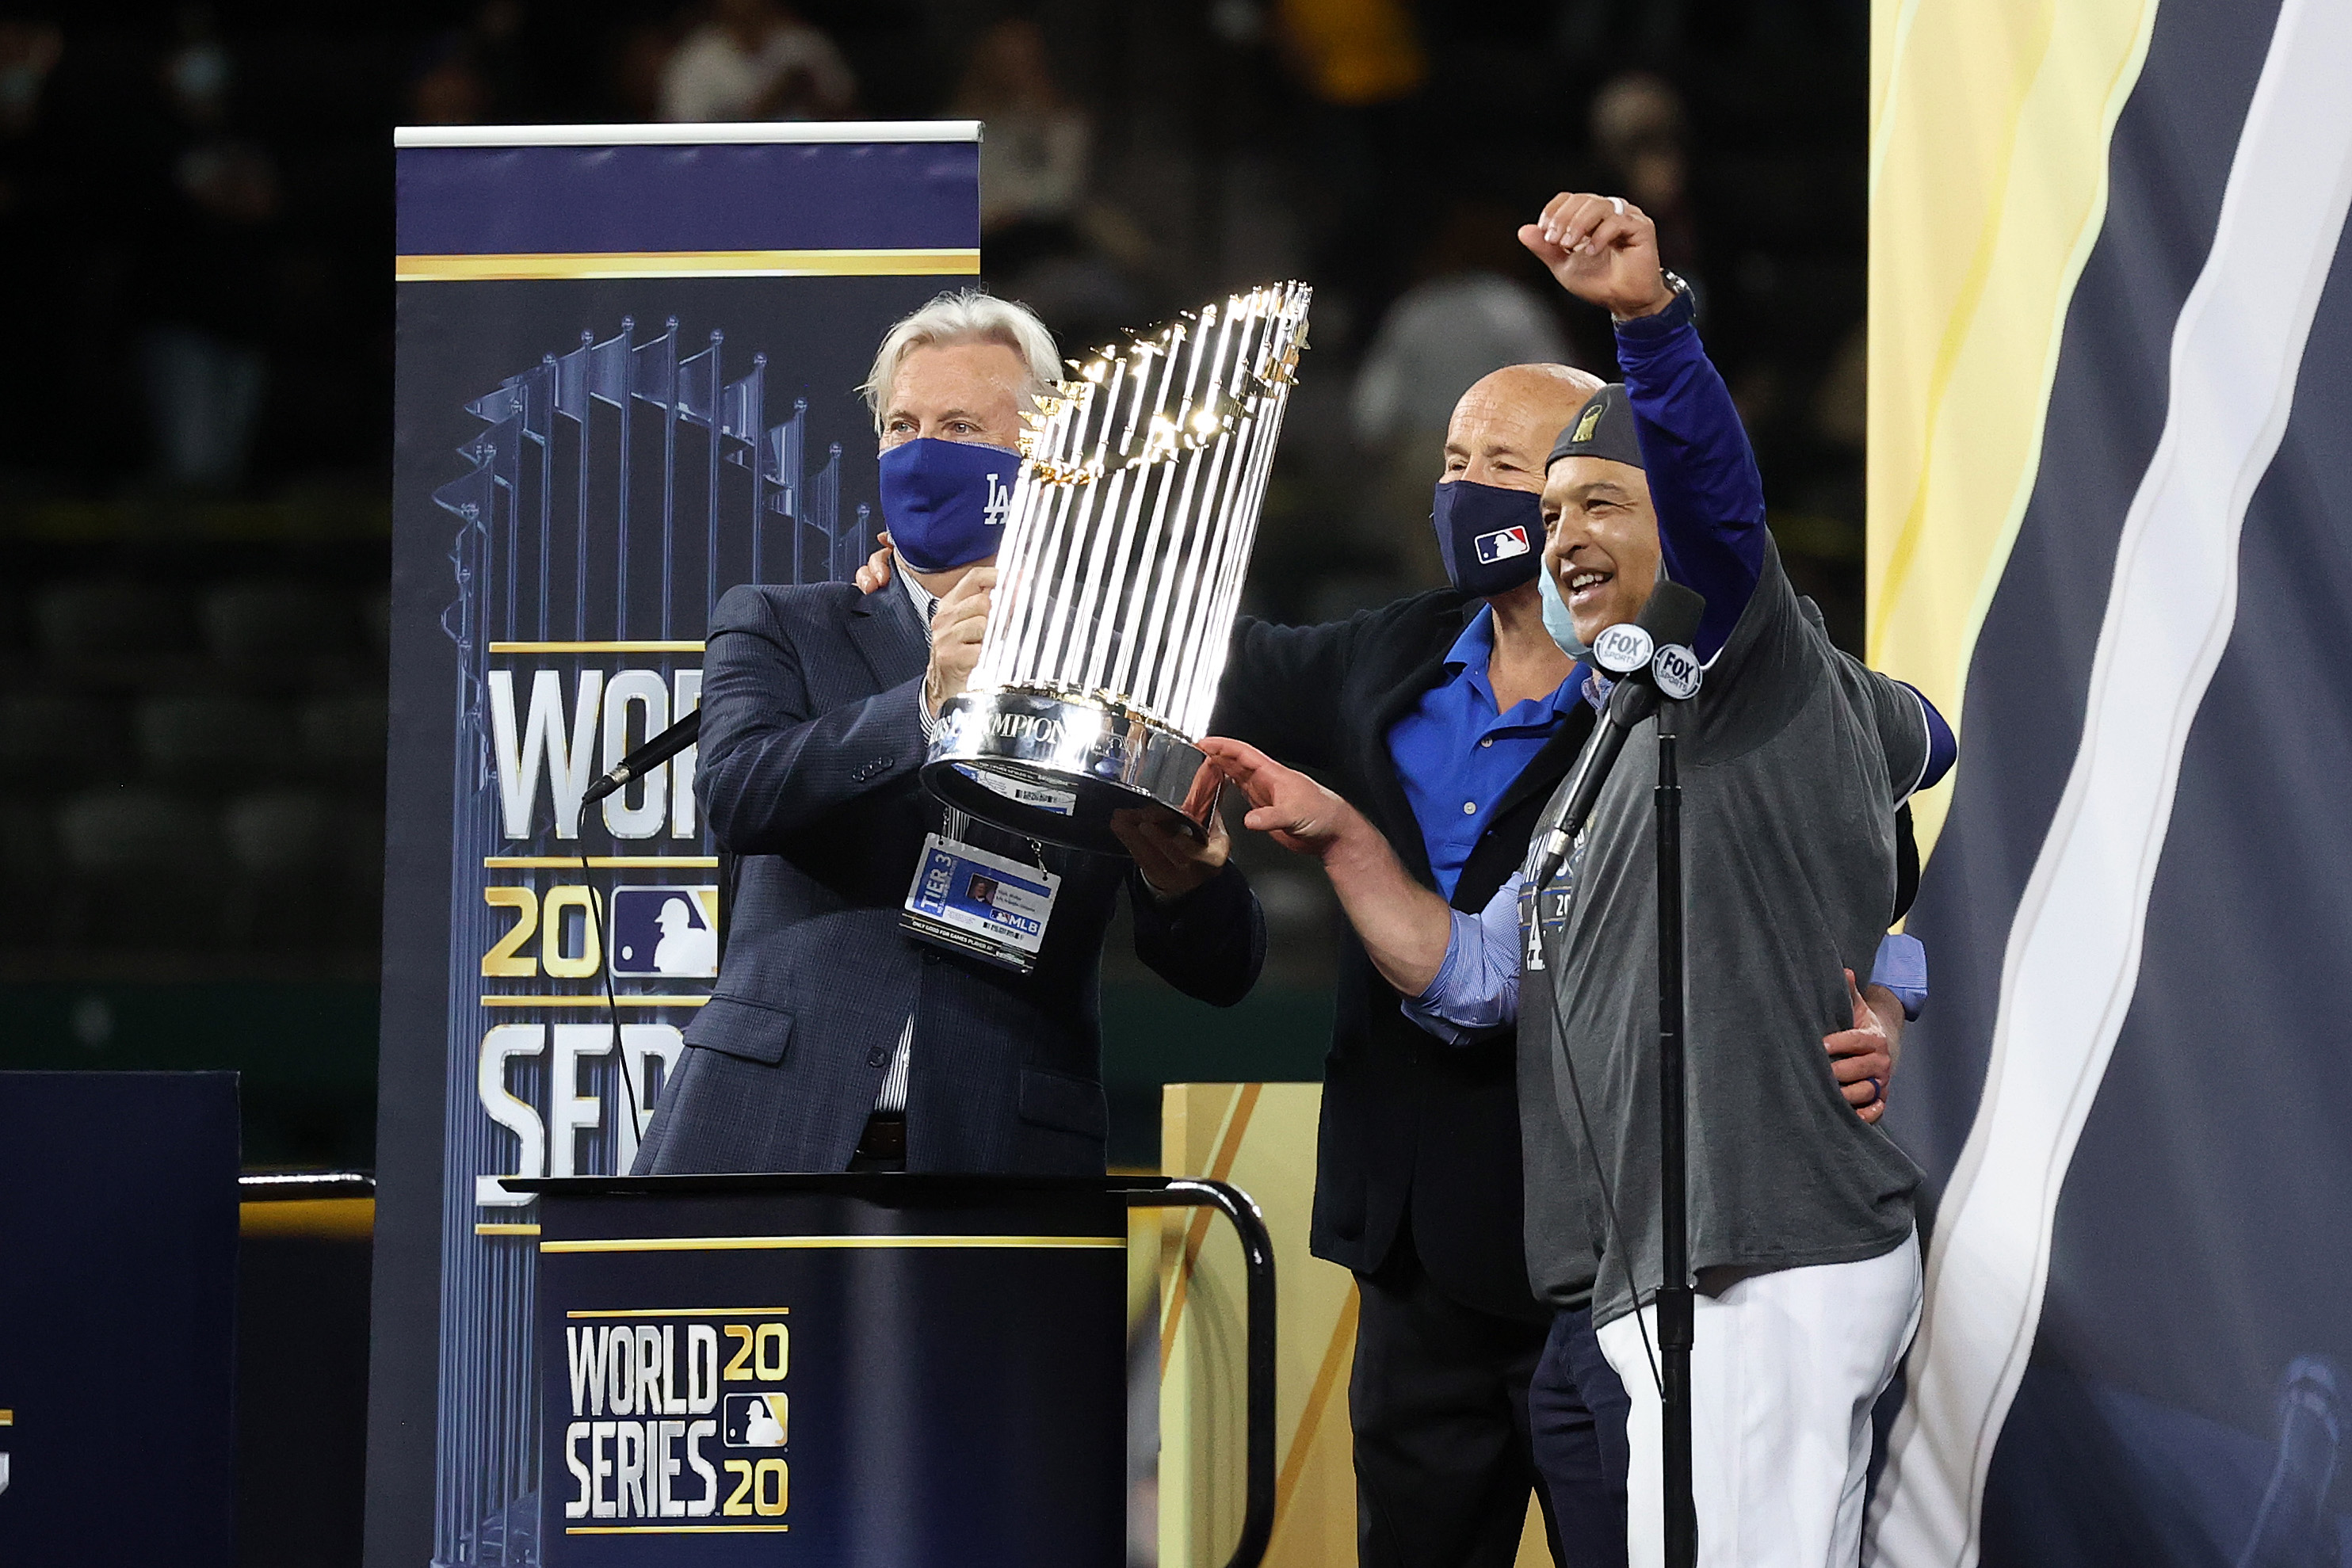 Photos: Dodgers Celebrate Their First World Series Title in 32